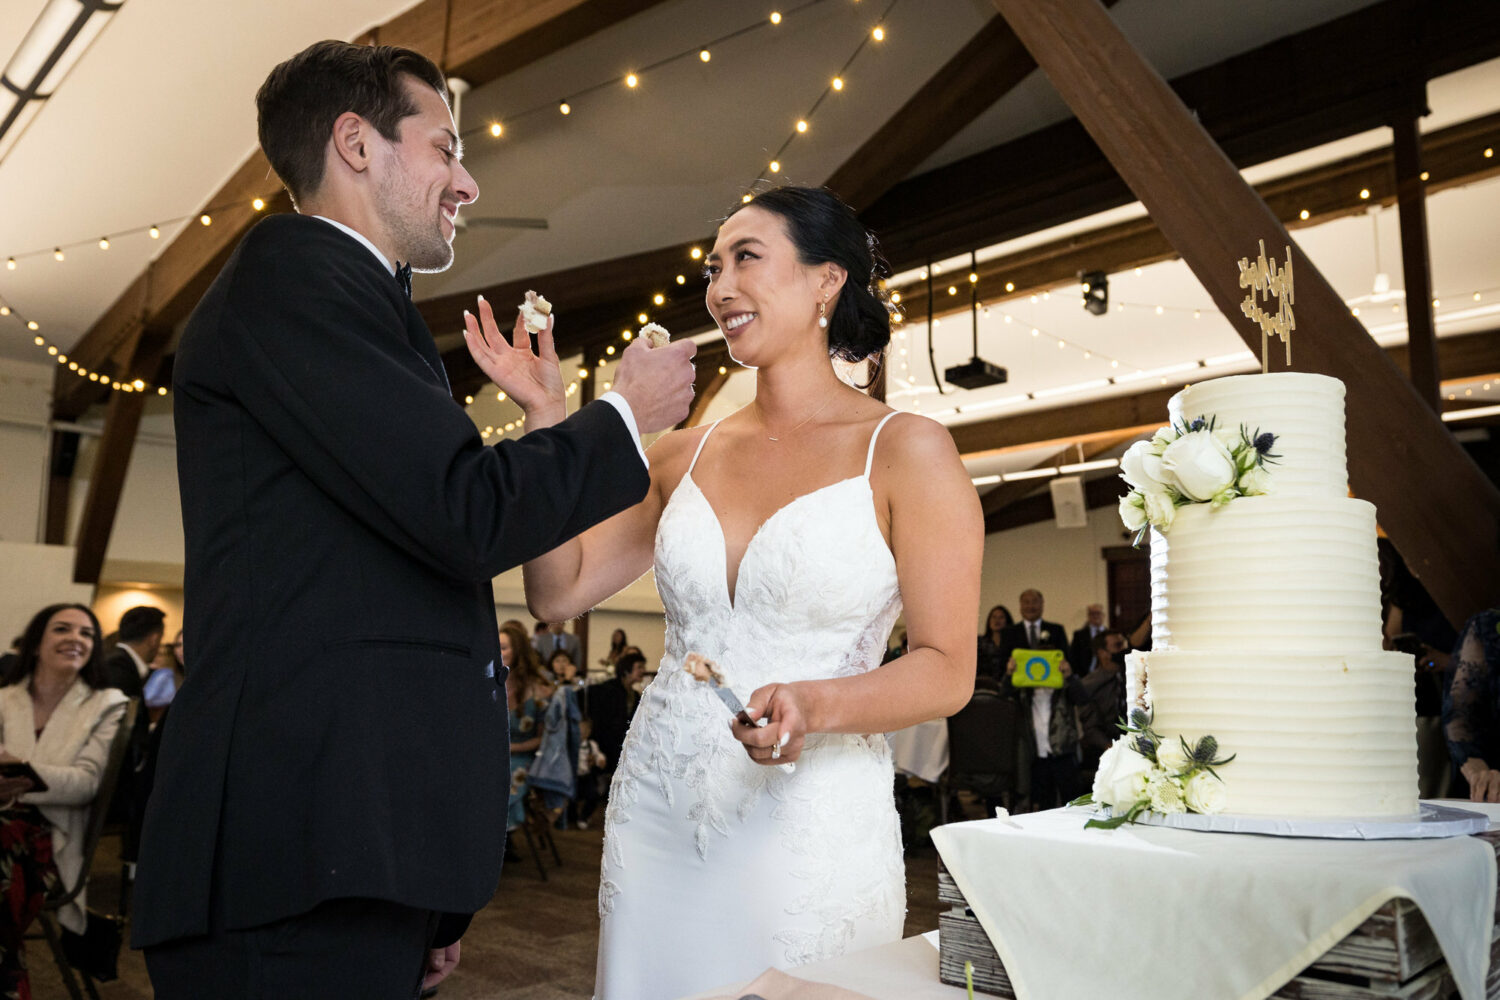 The bride and groom feed each other cake at their Olympic Village Events Center wedding reception.